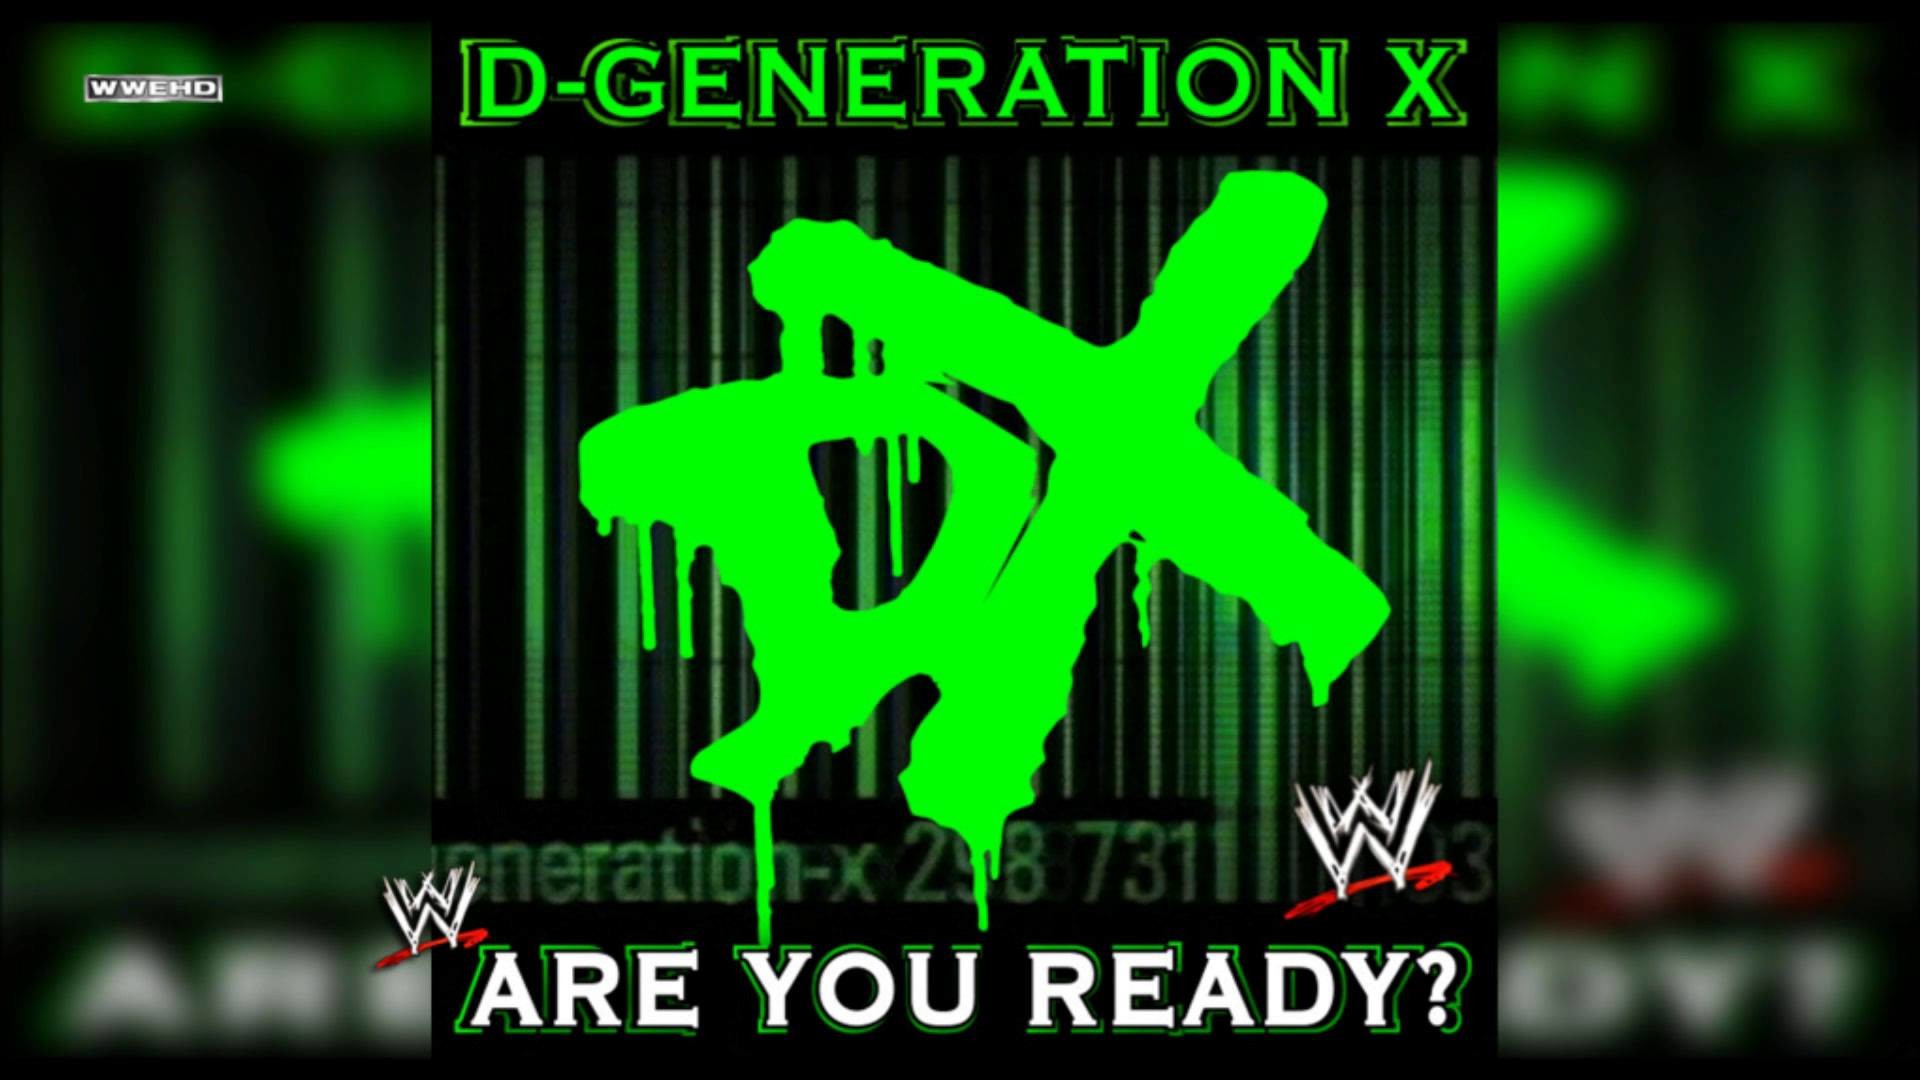 1920x1080 WWE: "Are You Ready?" (D-Generation X) Theme Song + AE (Arena Effect) -  YouTube